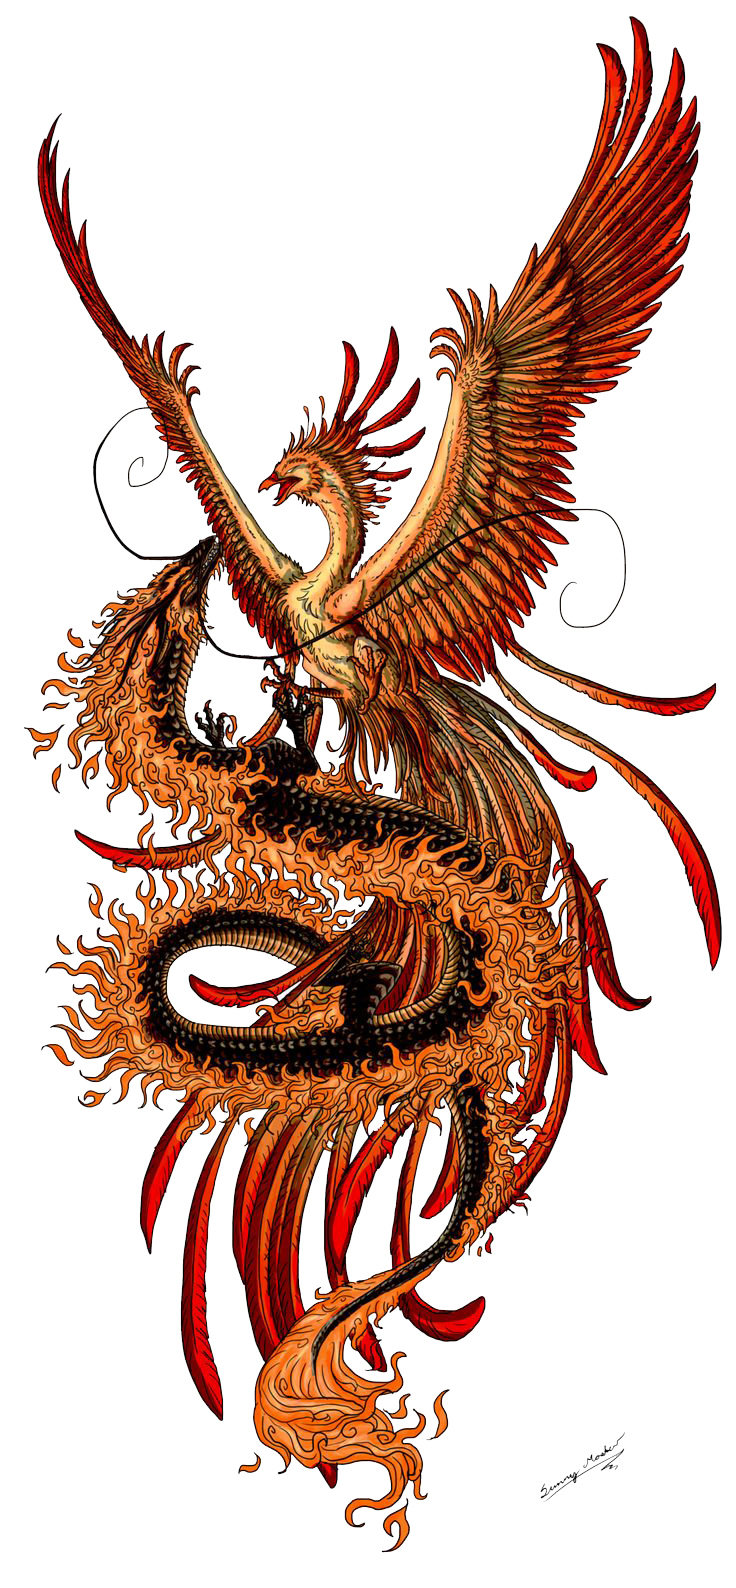 Download Tattoo Phoenix Chinese Tattoos Dragon Fenghuang ...